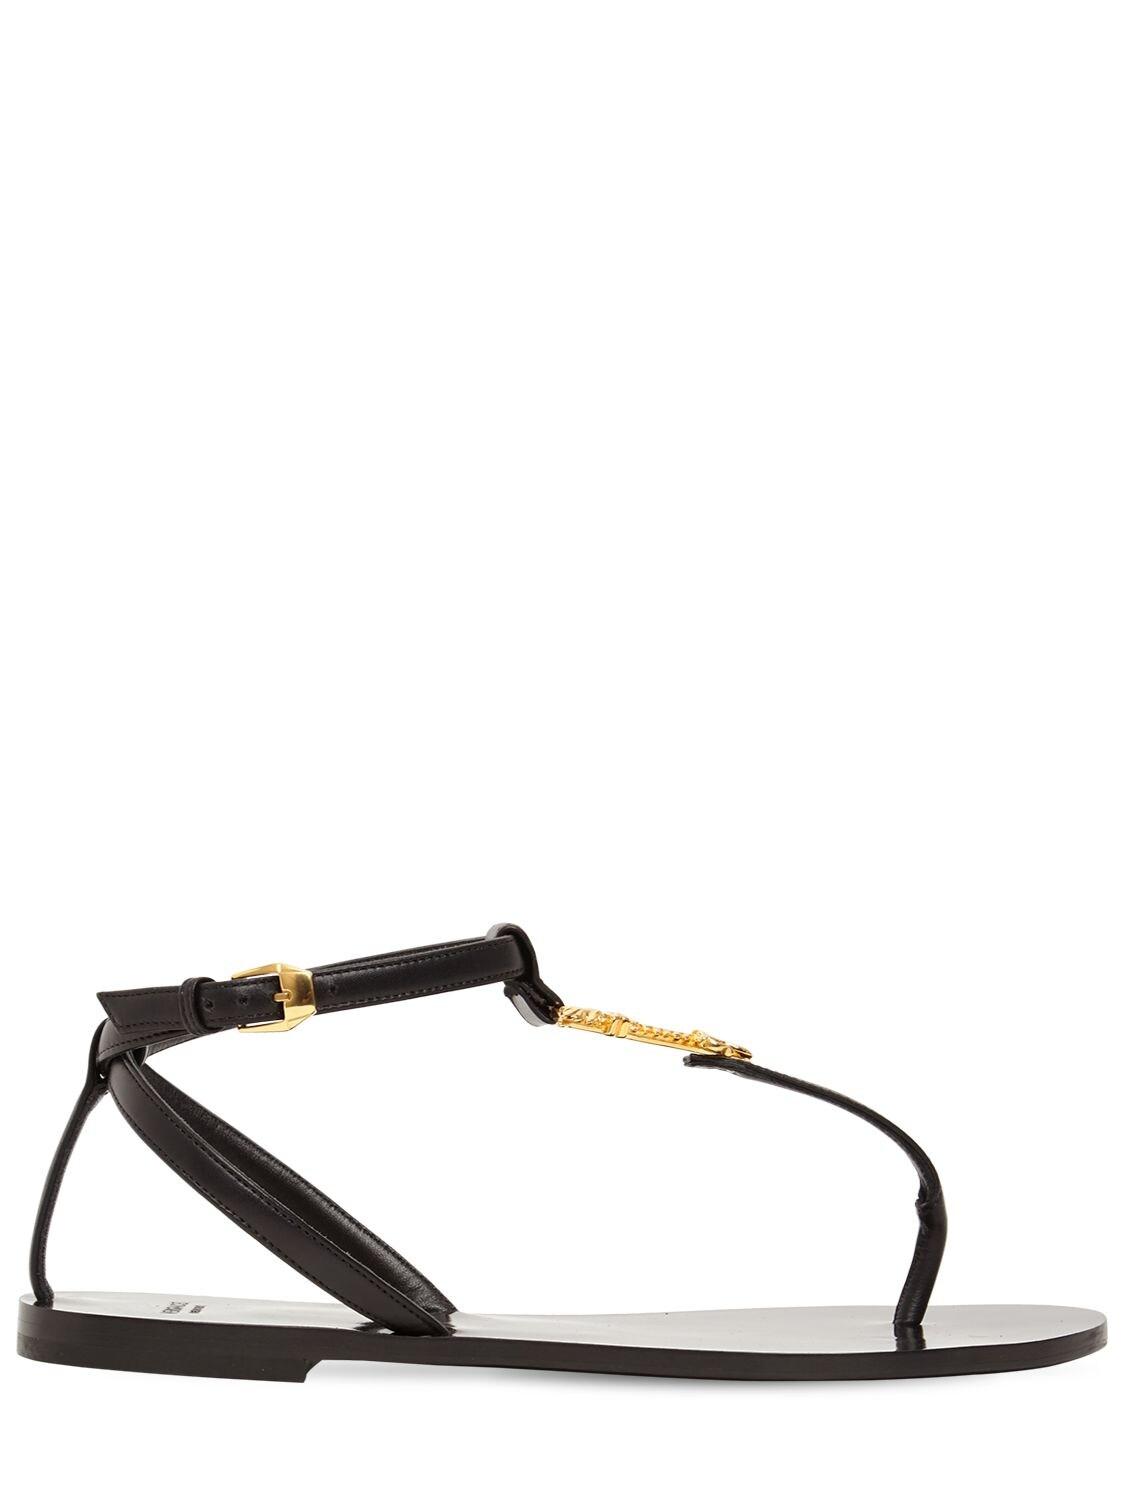 Versace 10mm Virtus Leather Thong Sandals in Black - Lyst